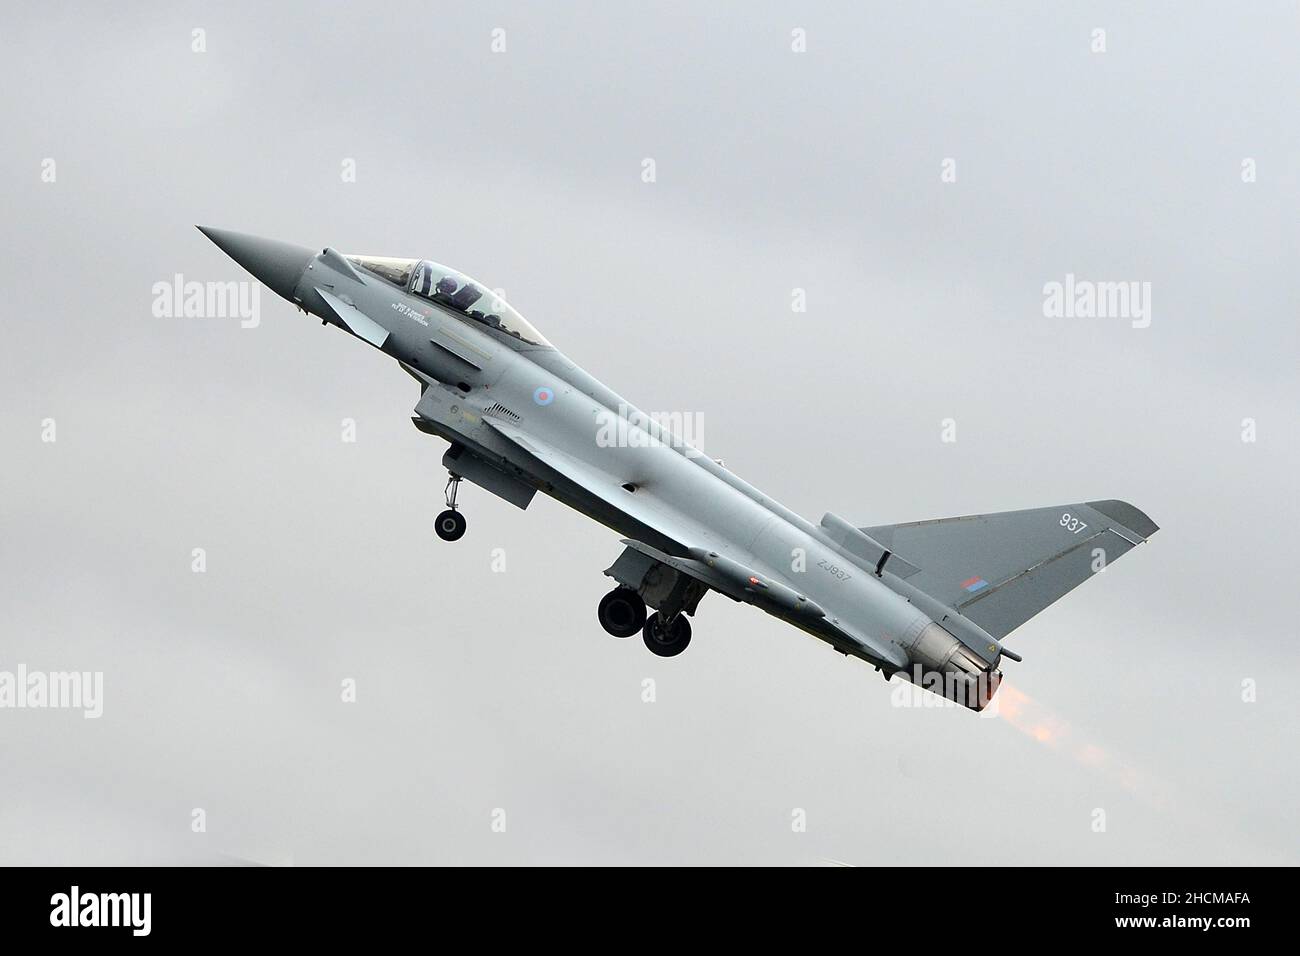 British military fighter jet, QRA is launched to intercept unidentified aircraft or threat to British air space, Quick Reaction Alert (QRA)  coningsby Stock Photo